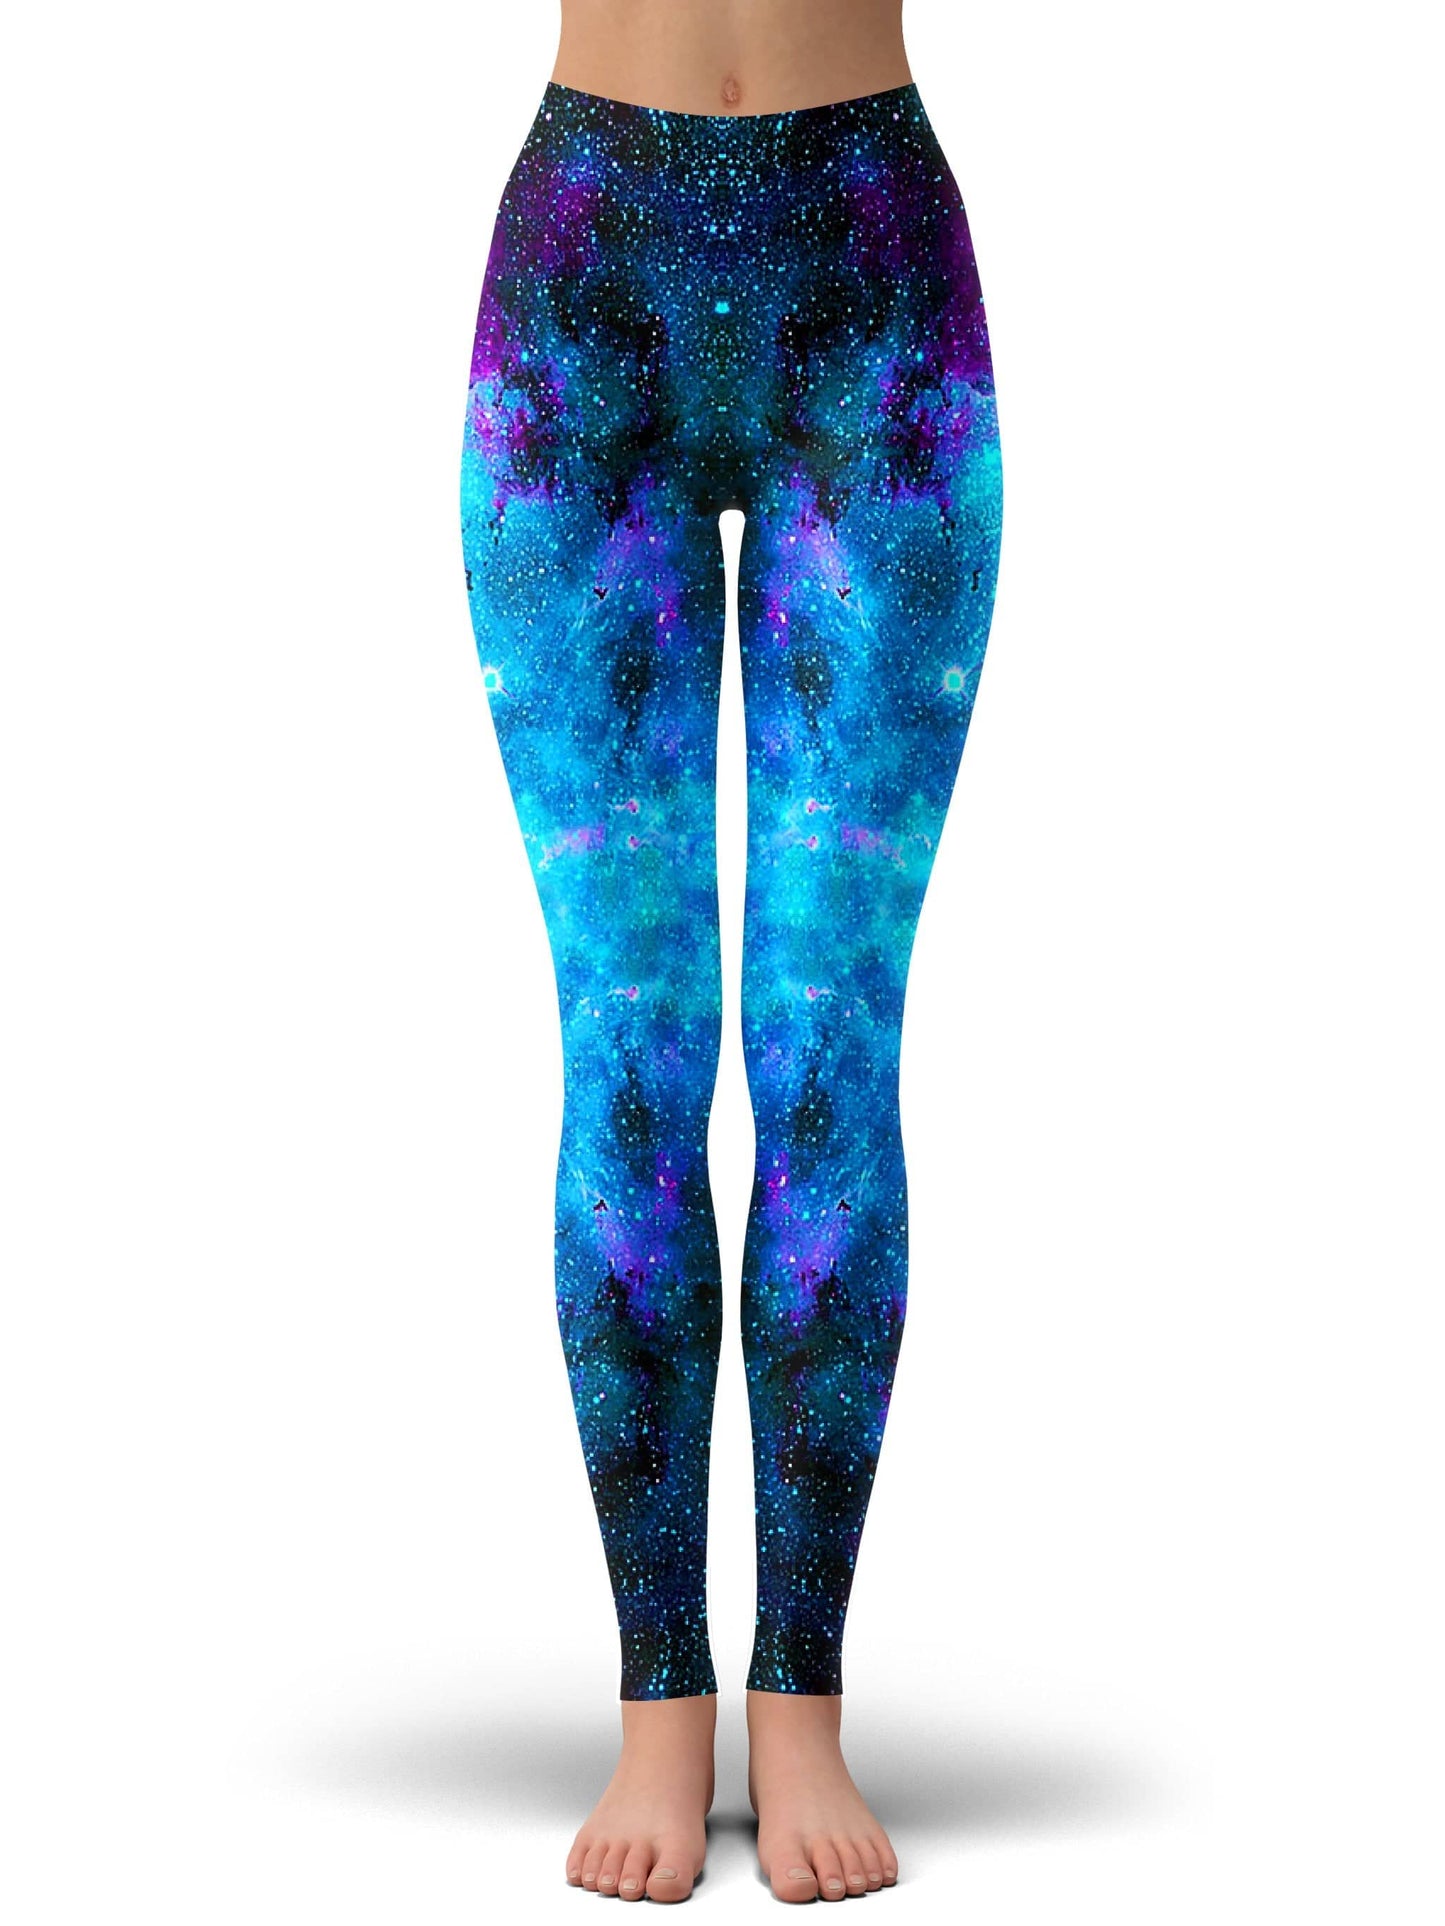 Galactic Spectrum Crop Top and Leggings with PM 2.5 Face Mask Combo, iEDM, | iEDM